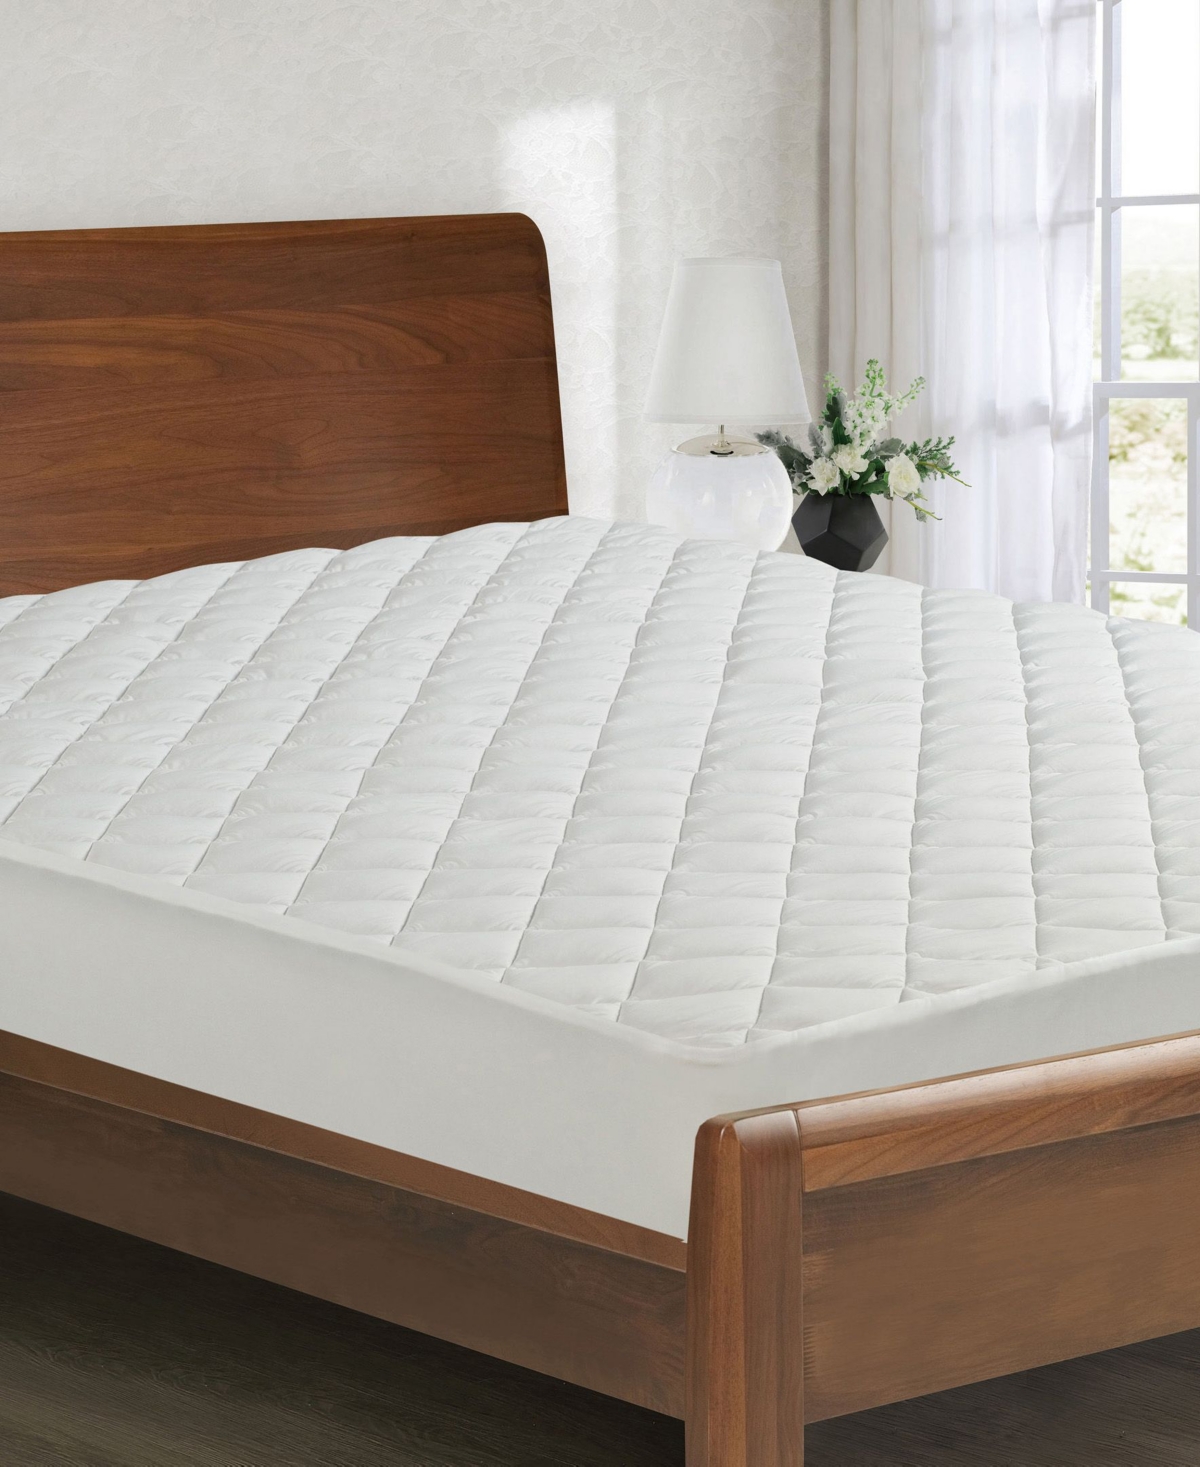 All-In-One All Season Reversible Cooling Warming Fitted Mattress Pad, King